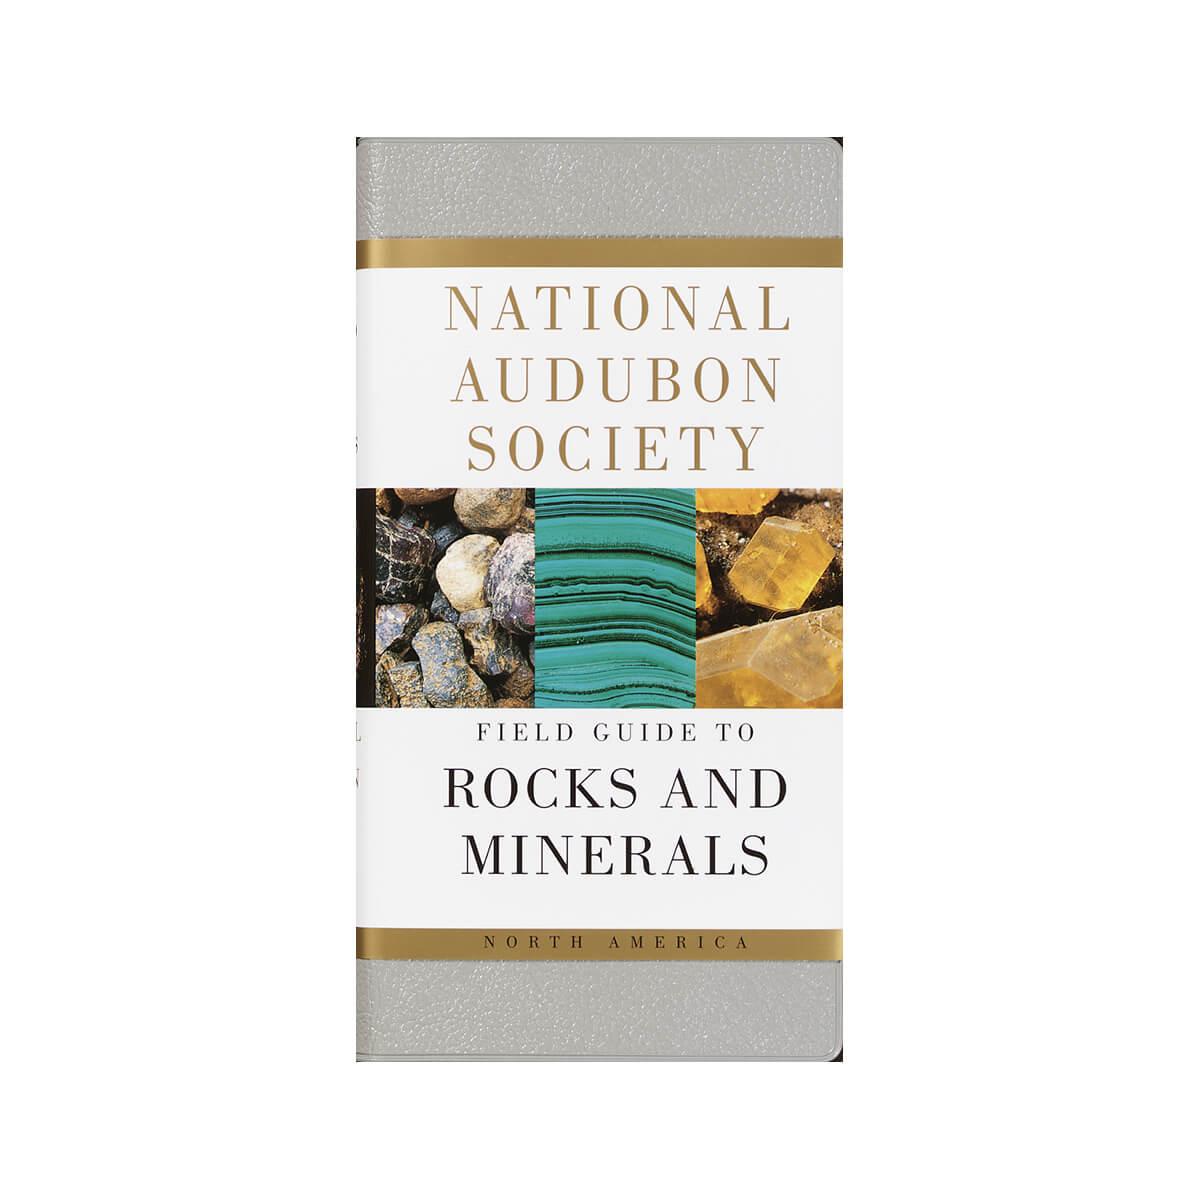  National Audubon Society Field Guide To Rocks And Minerals